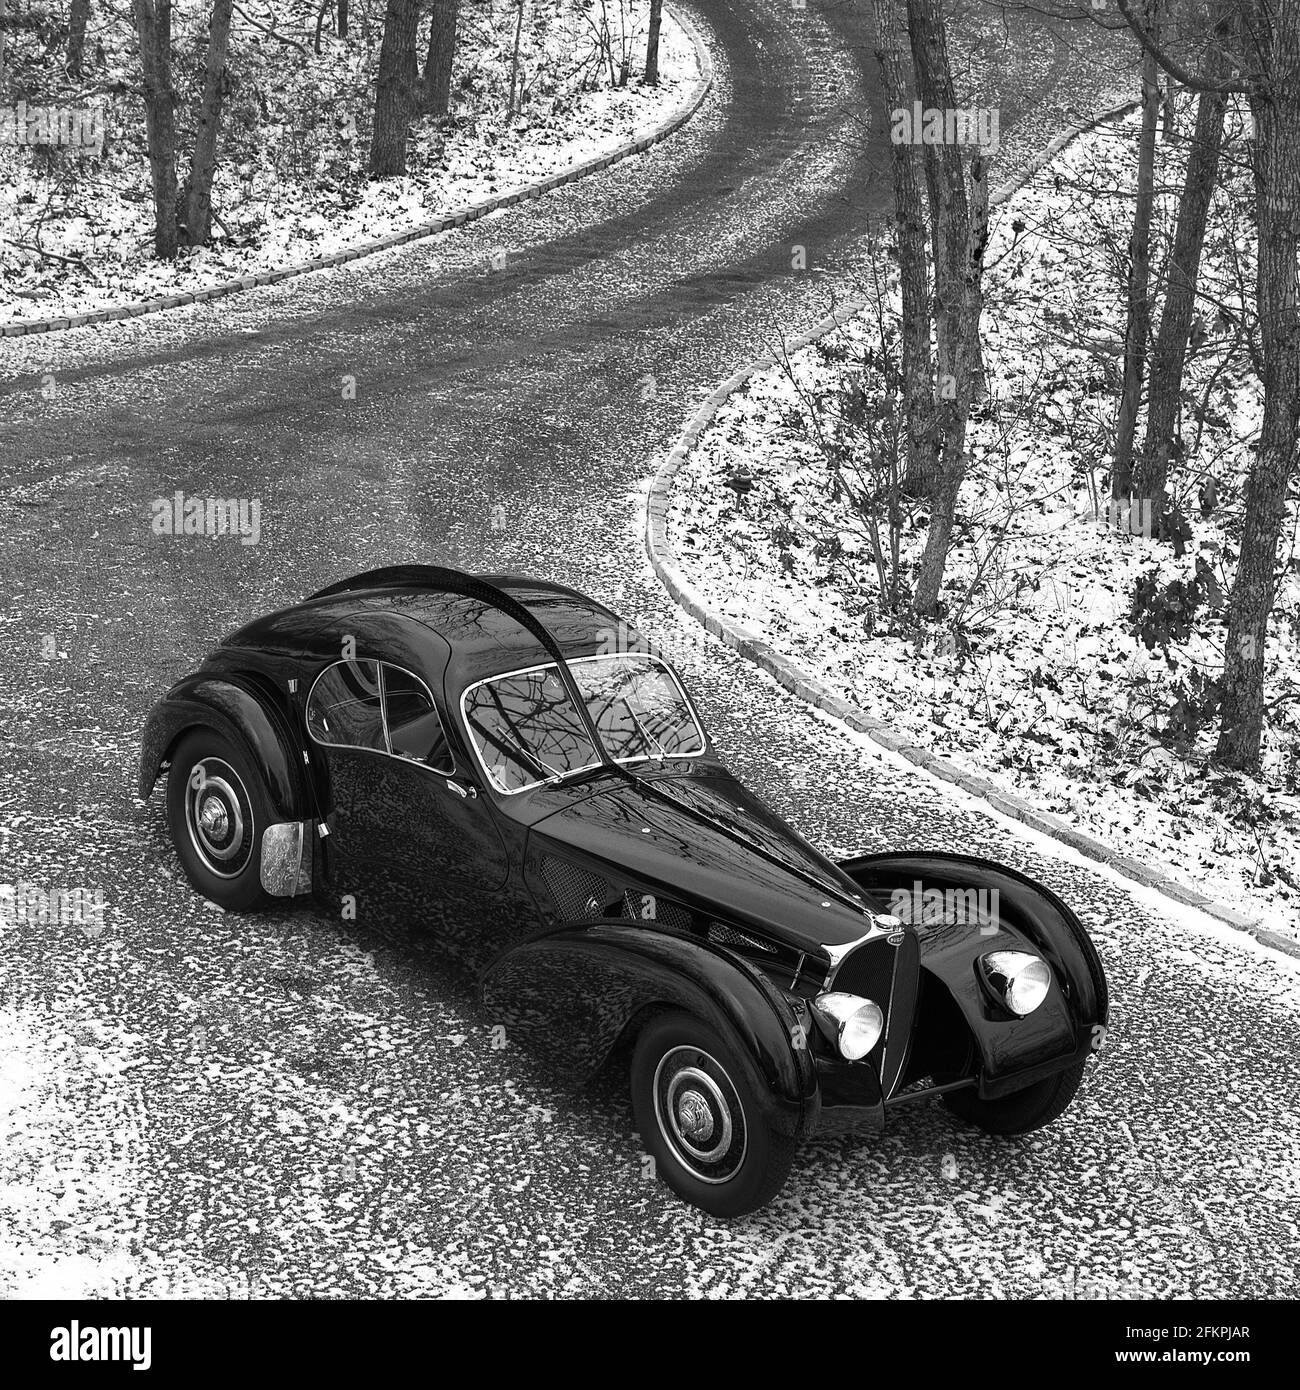 Bugatti Type 57 SC Atlantic Coupe in the Ralph Lauren car collection 1991  Stock Photo - Alamy